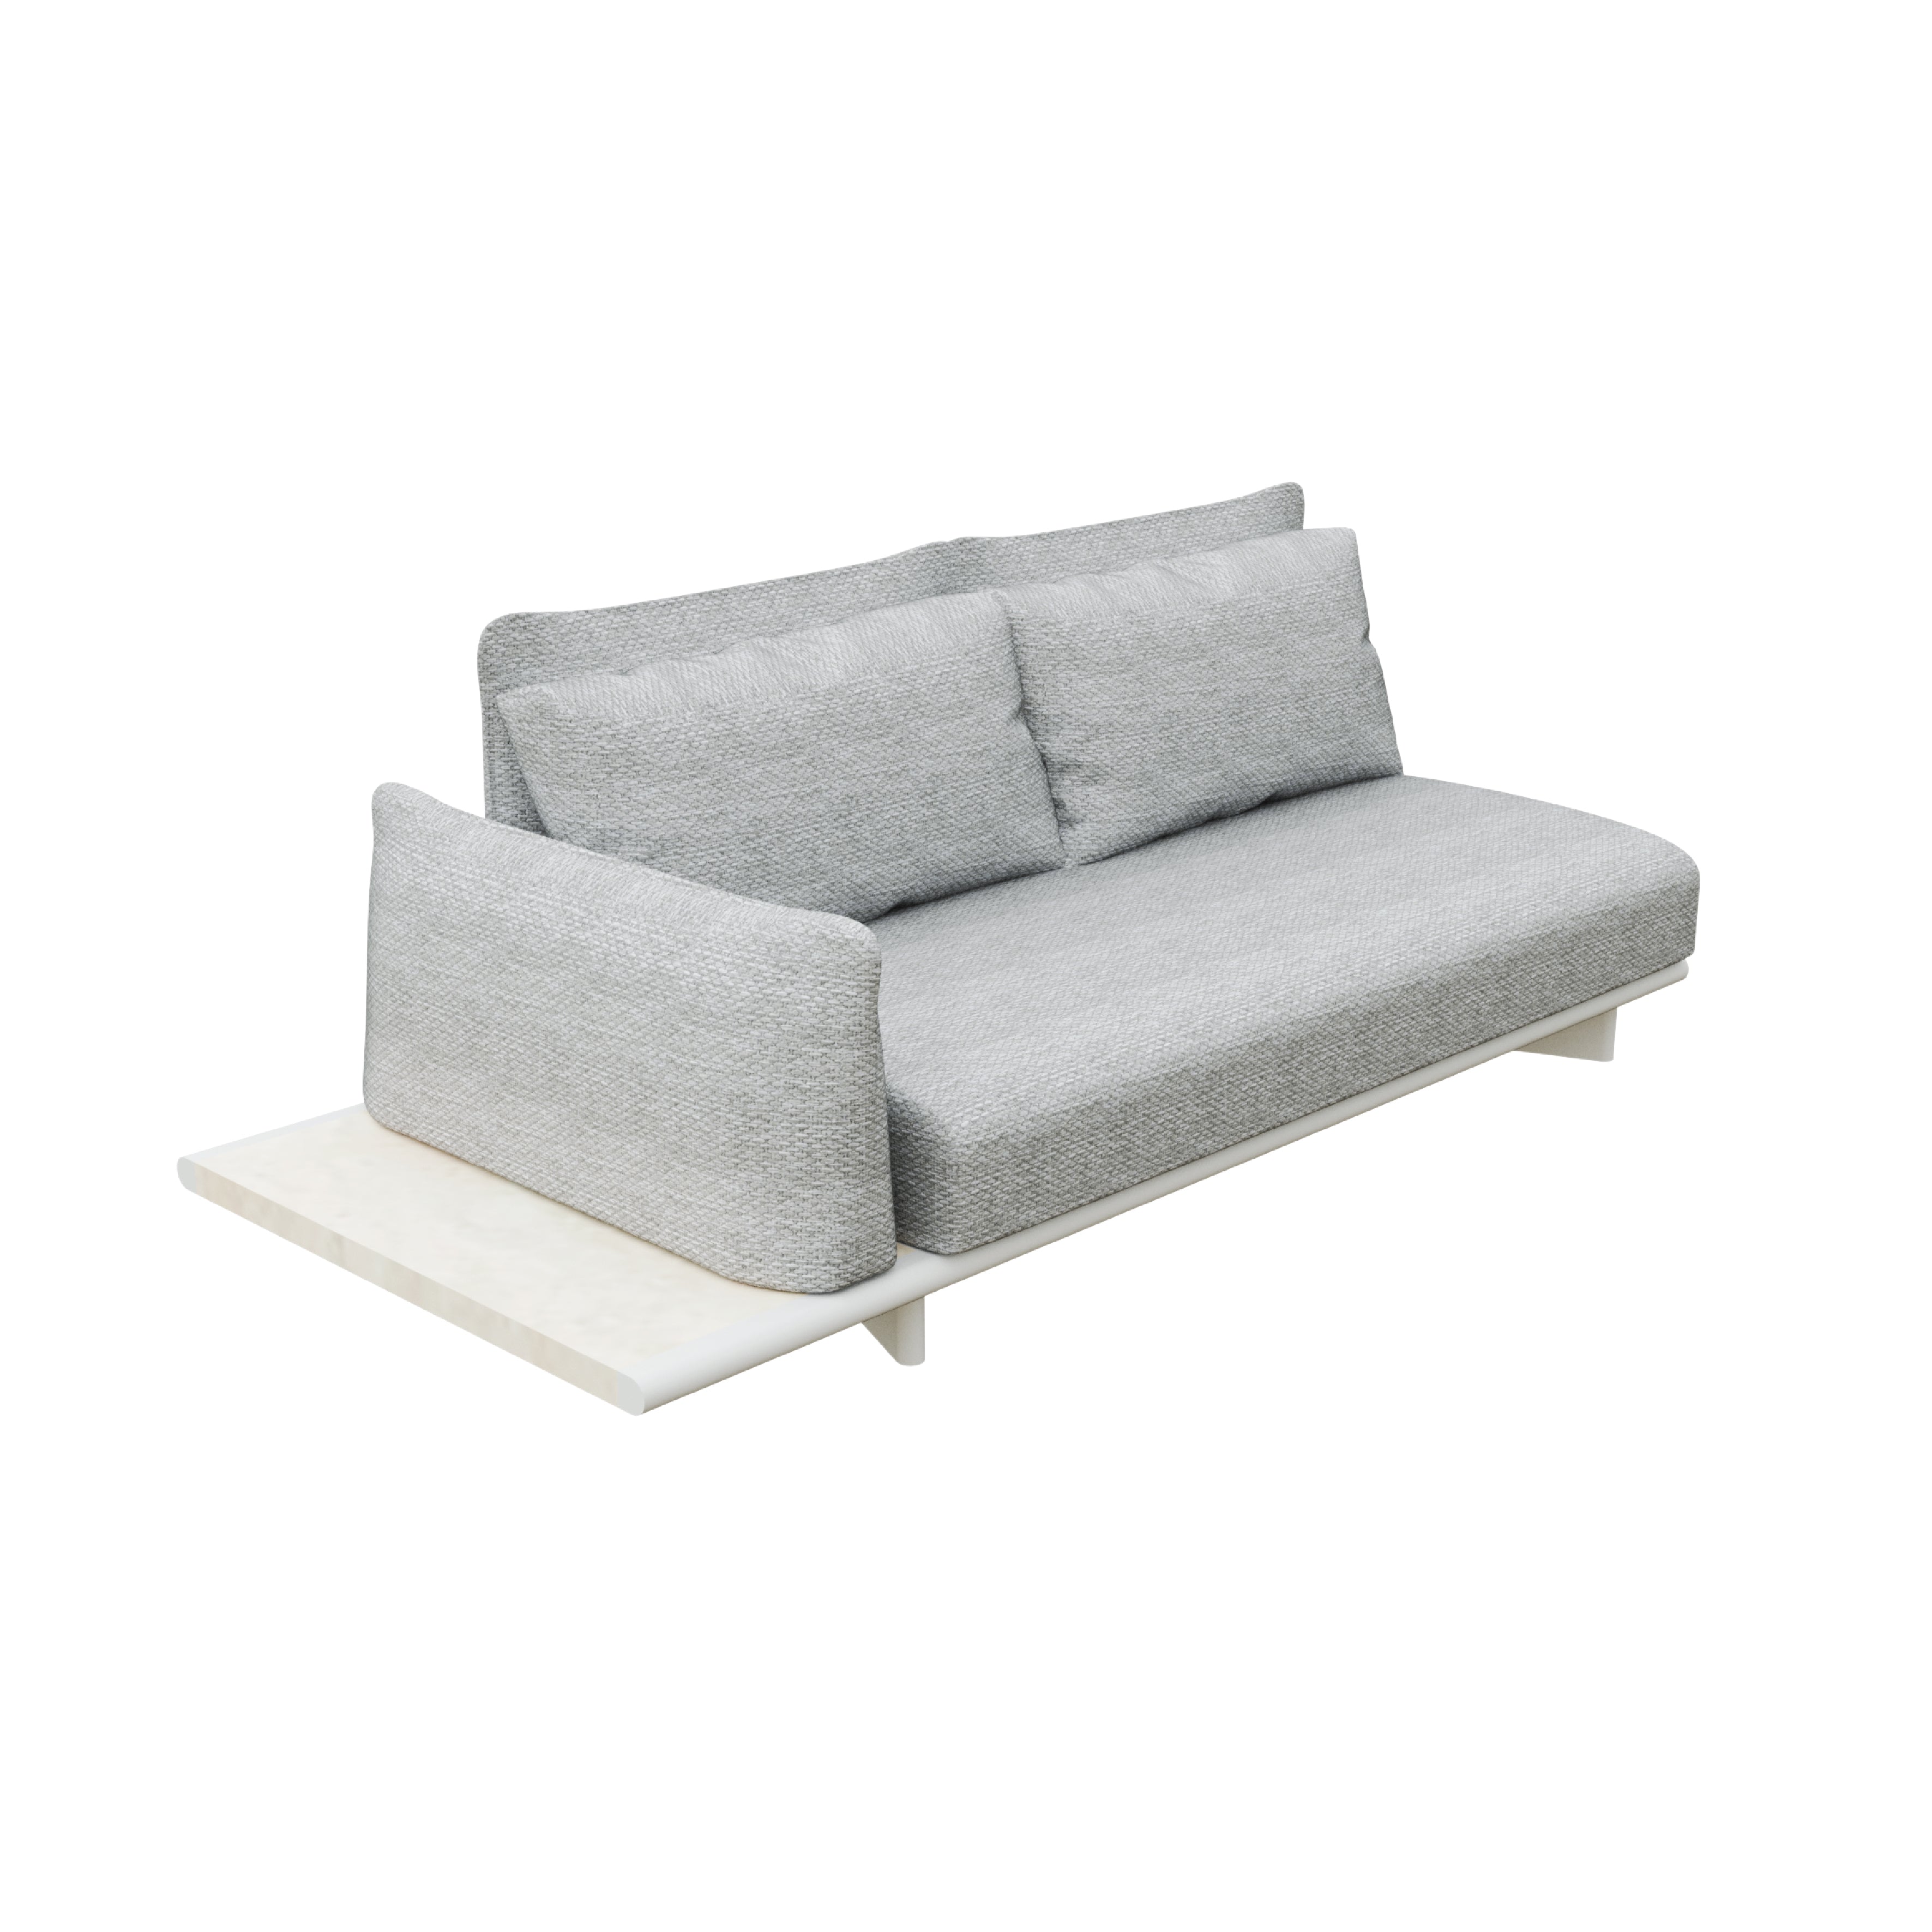 VANCE 2 SEATER WITH CERAMIC RIGHT ARM